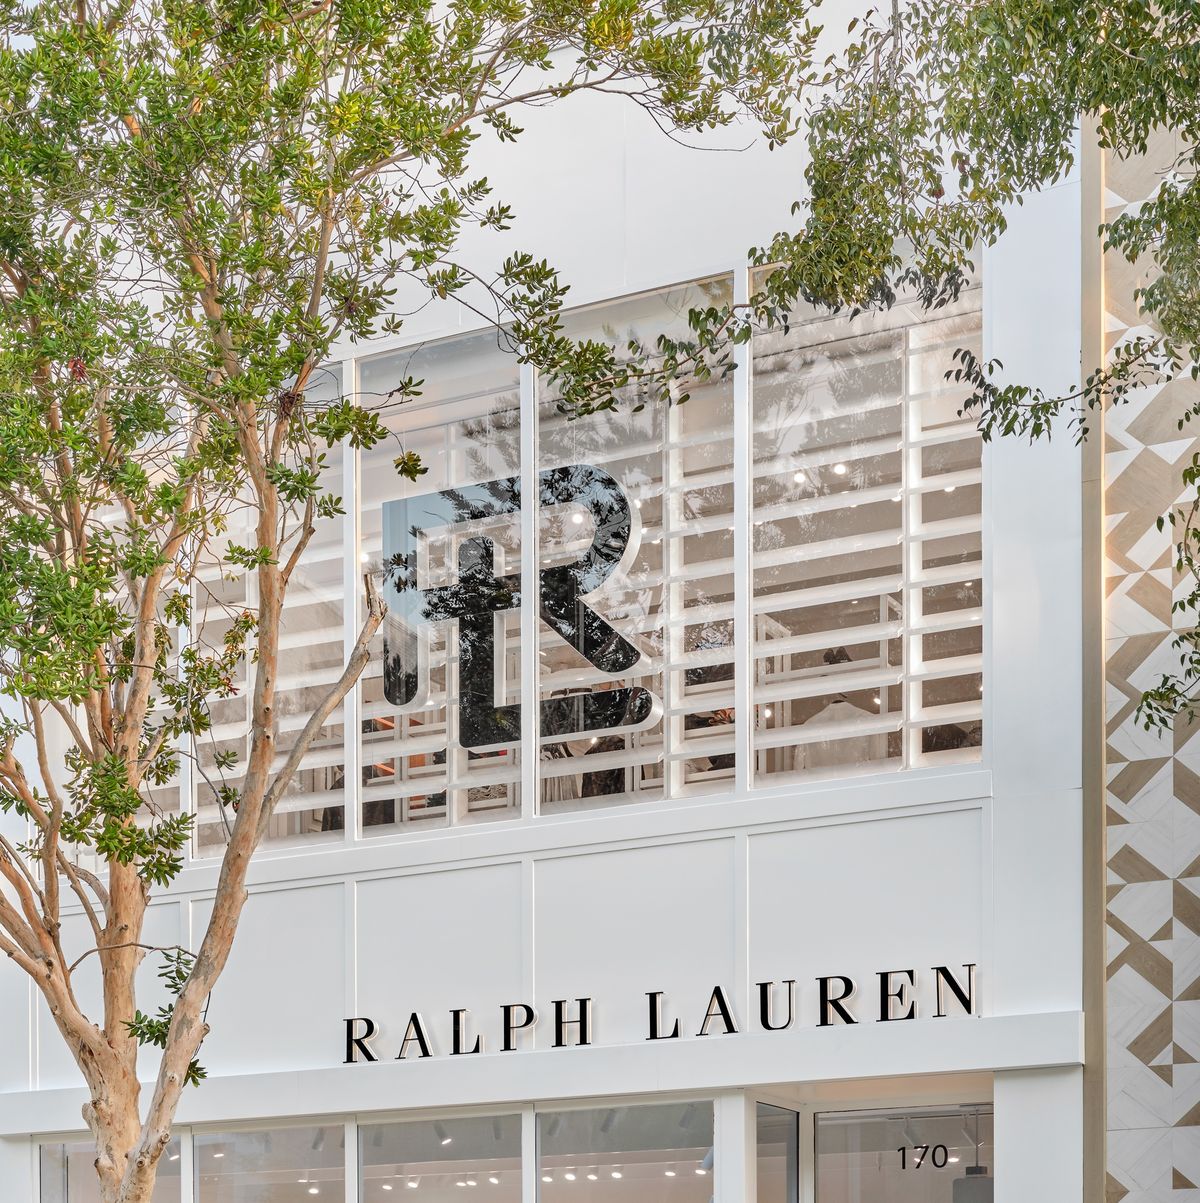 Luxury Shopping in the Miami Design District